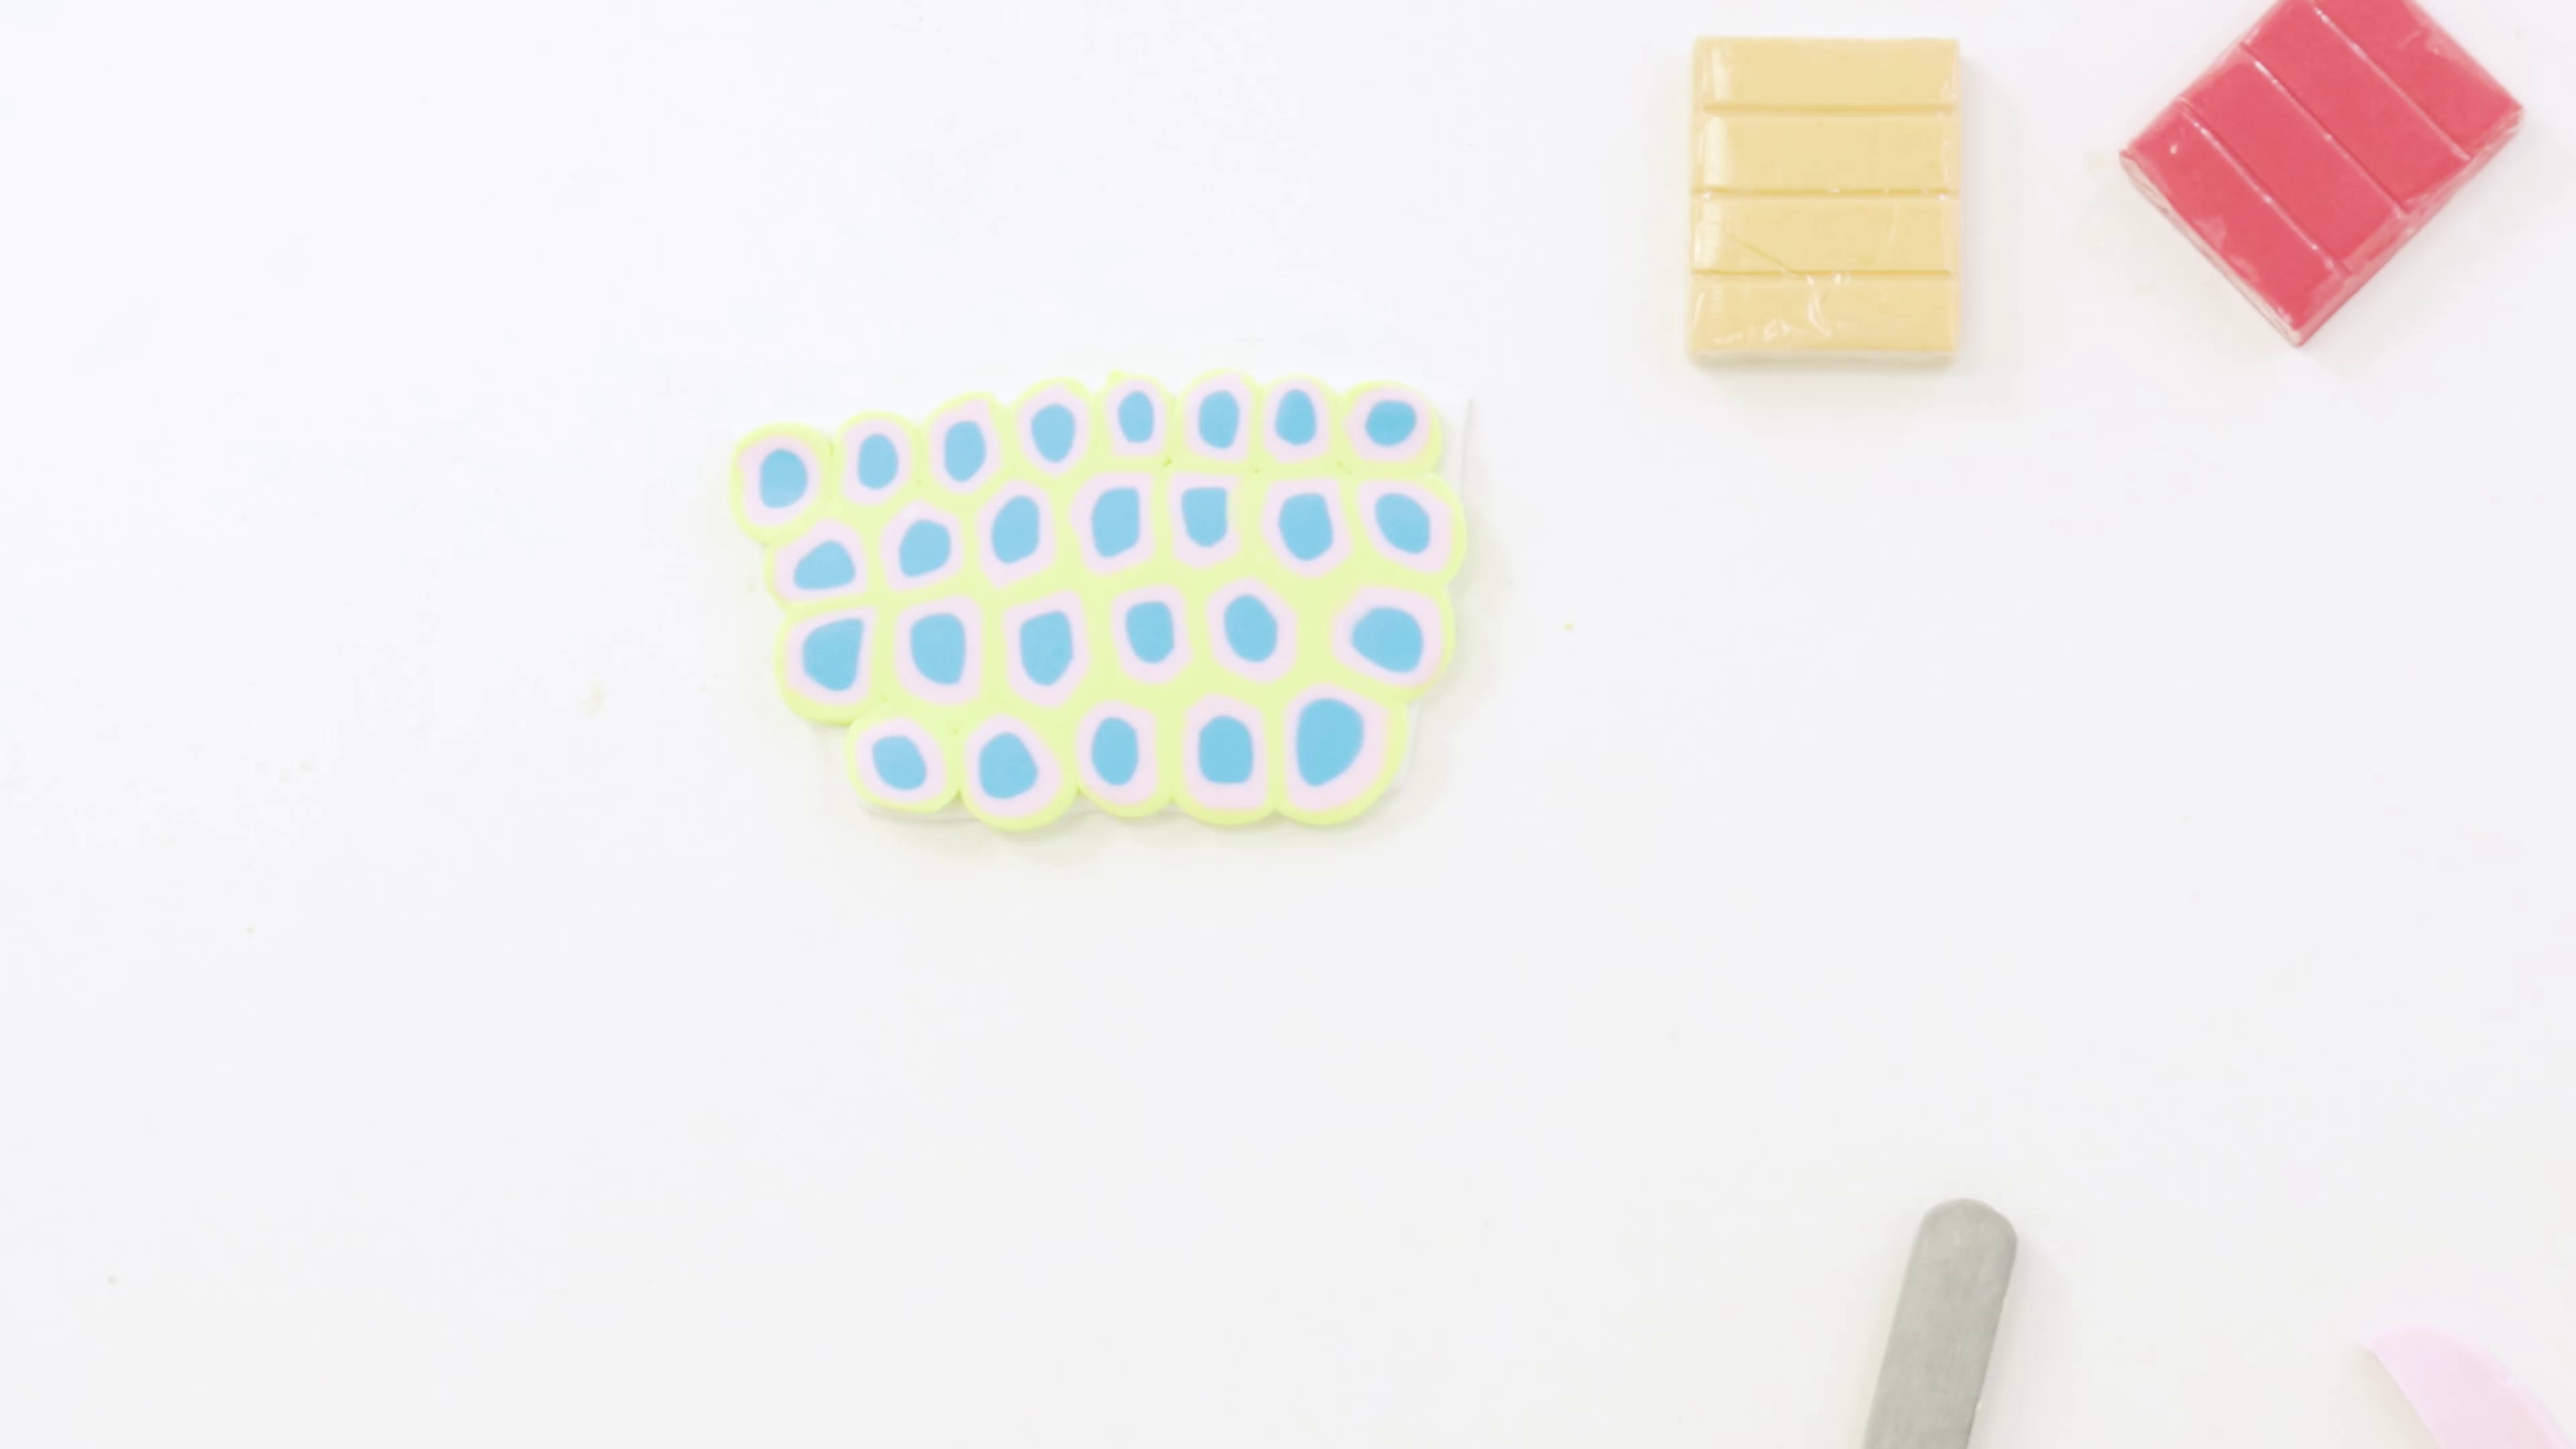 10. Circular polymer clay pattern using green, blue, and pink colours